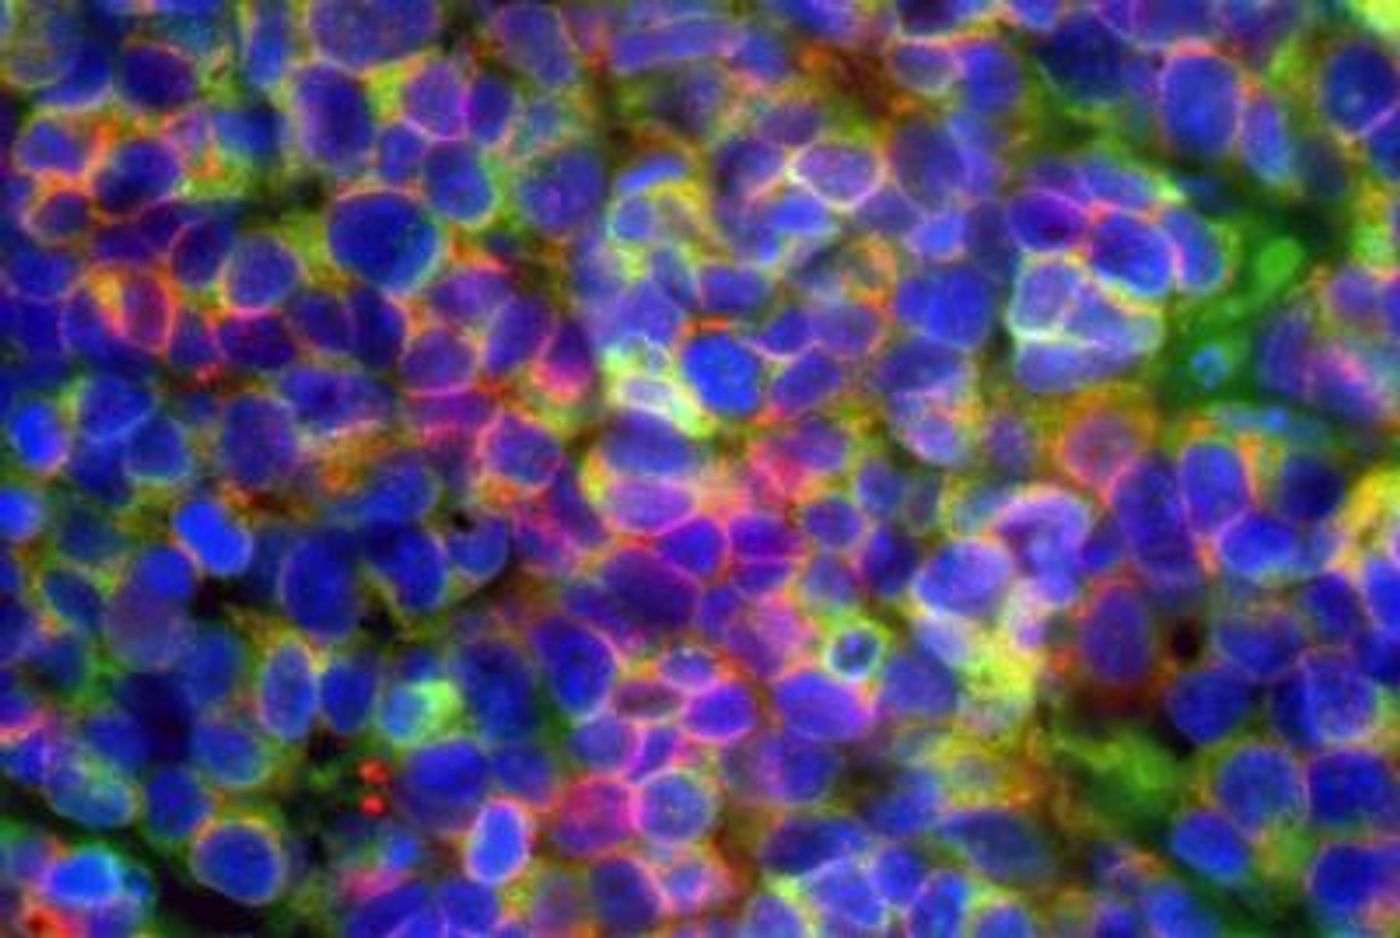 Microscopic image of small cell neuroendocrine prostate cancer: cancer cells are seen expressing diagnostic prostate cancer markers in green and red (blue color indicates the cell nucleus) / Credit: Jung Wook Park & Owen Witte